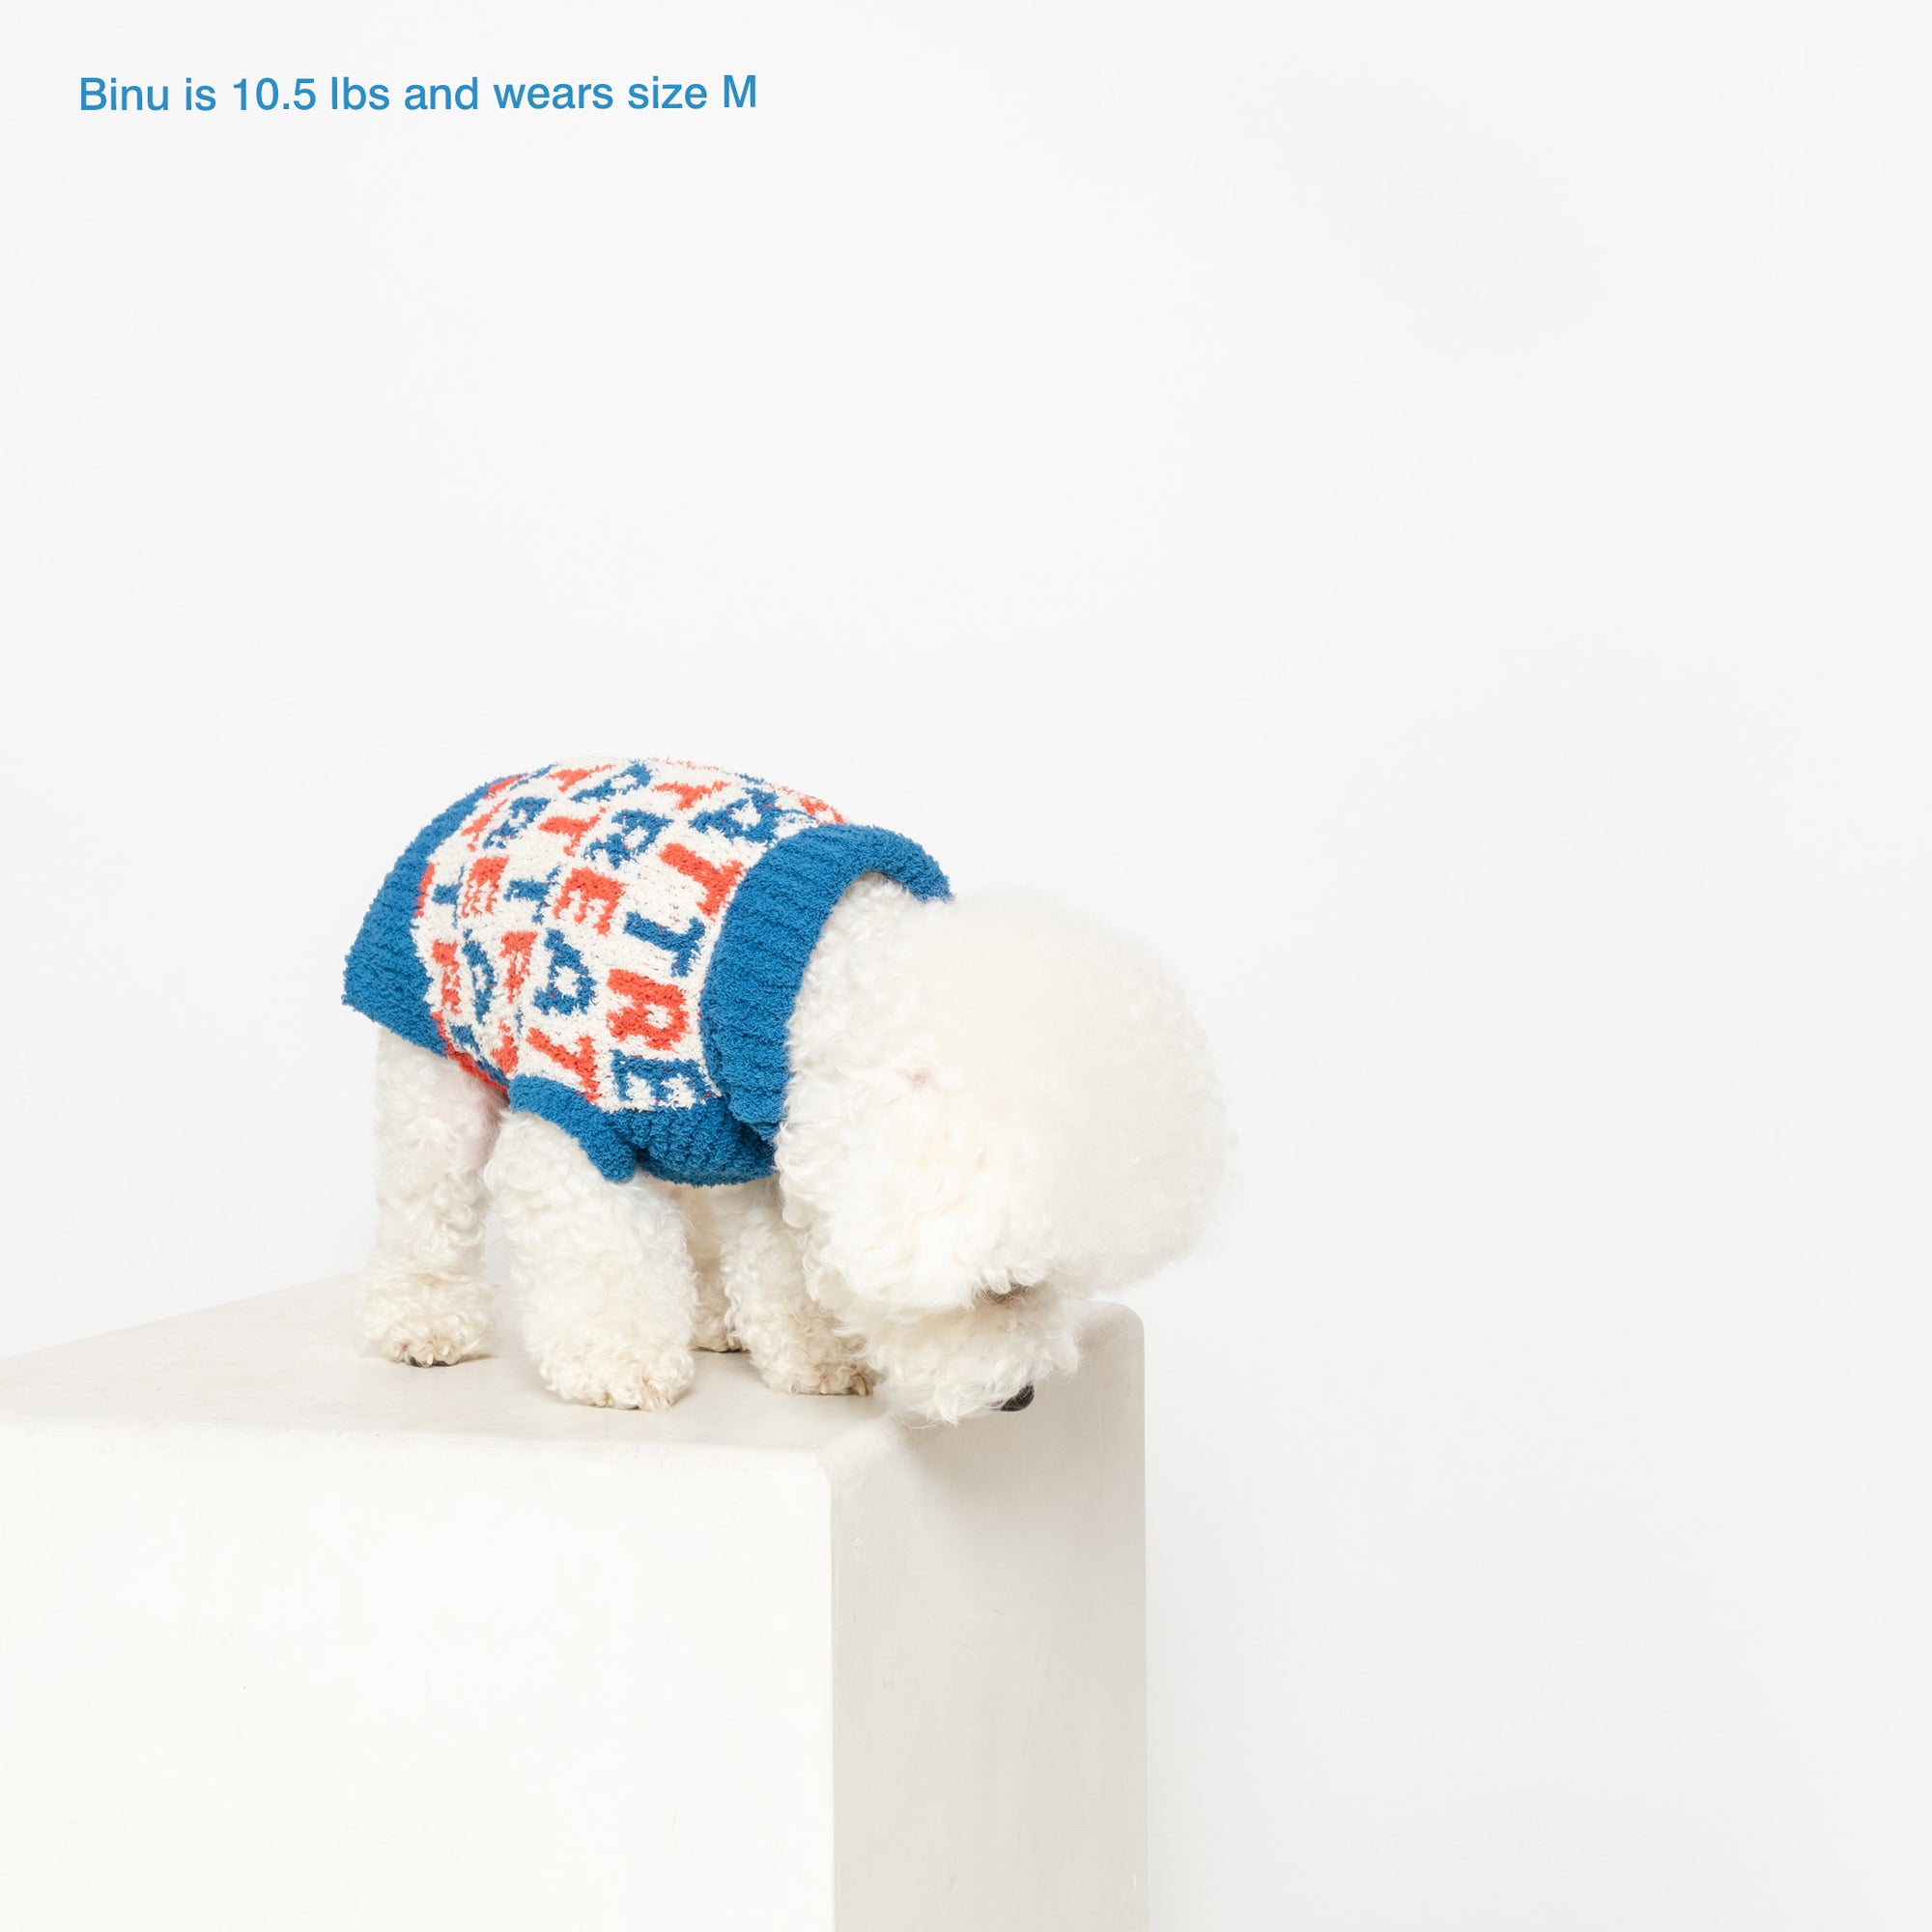 A fluffy white Bichon Frise named Binu, weighing 10.5 lbs and wearing a size M, is captured bending down from a white ledge, clad in a cozy blue knit sweater adorned with a vibrant red and white "Treat" pattern.